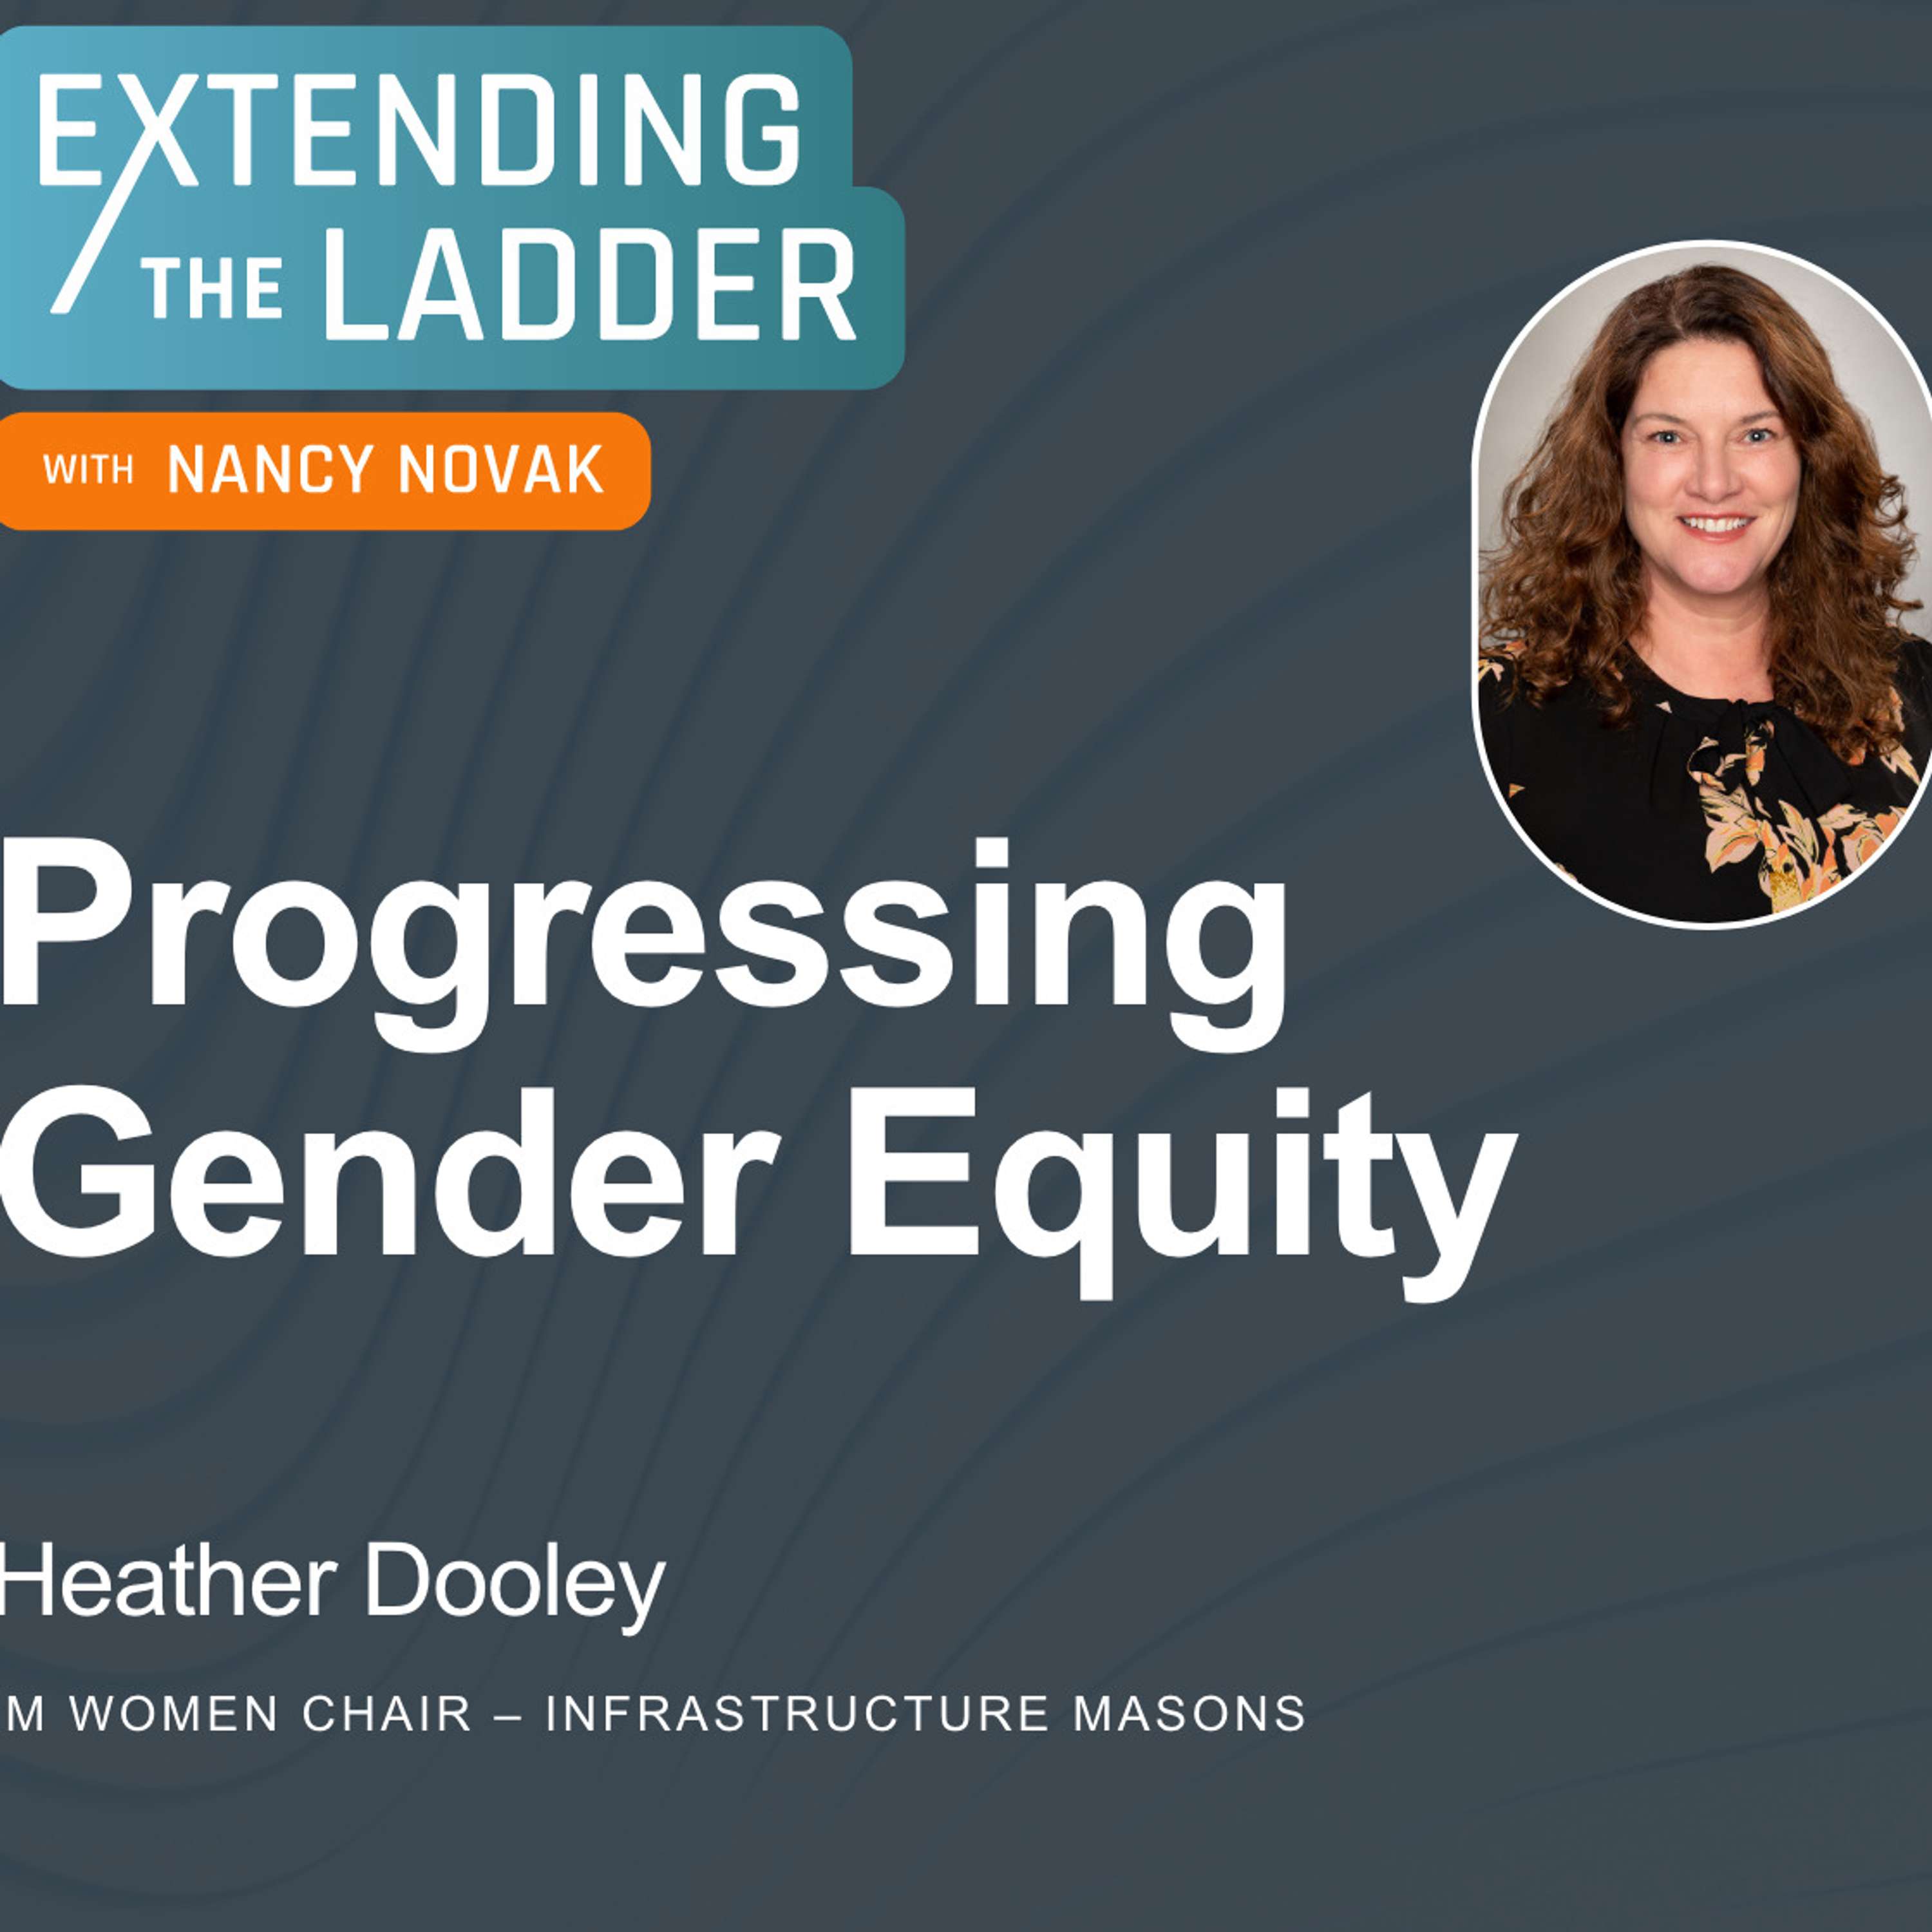 IM Women Group Aims to Progress Gender Equity Through Education Campaign with Heather Dooley